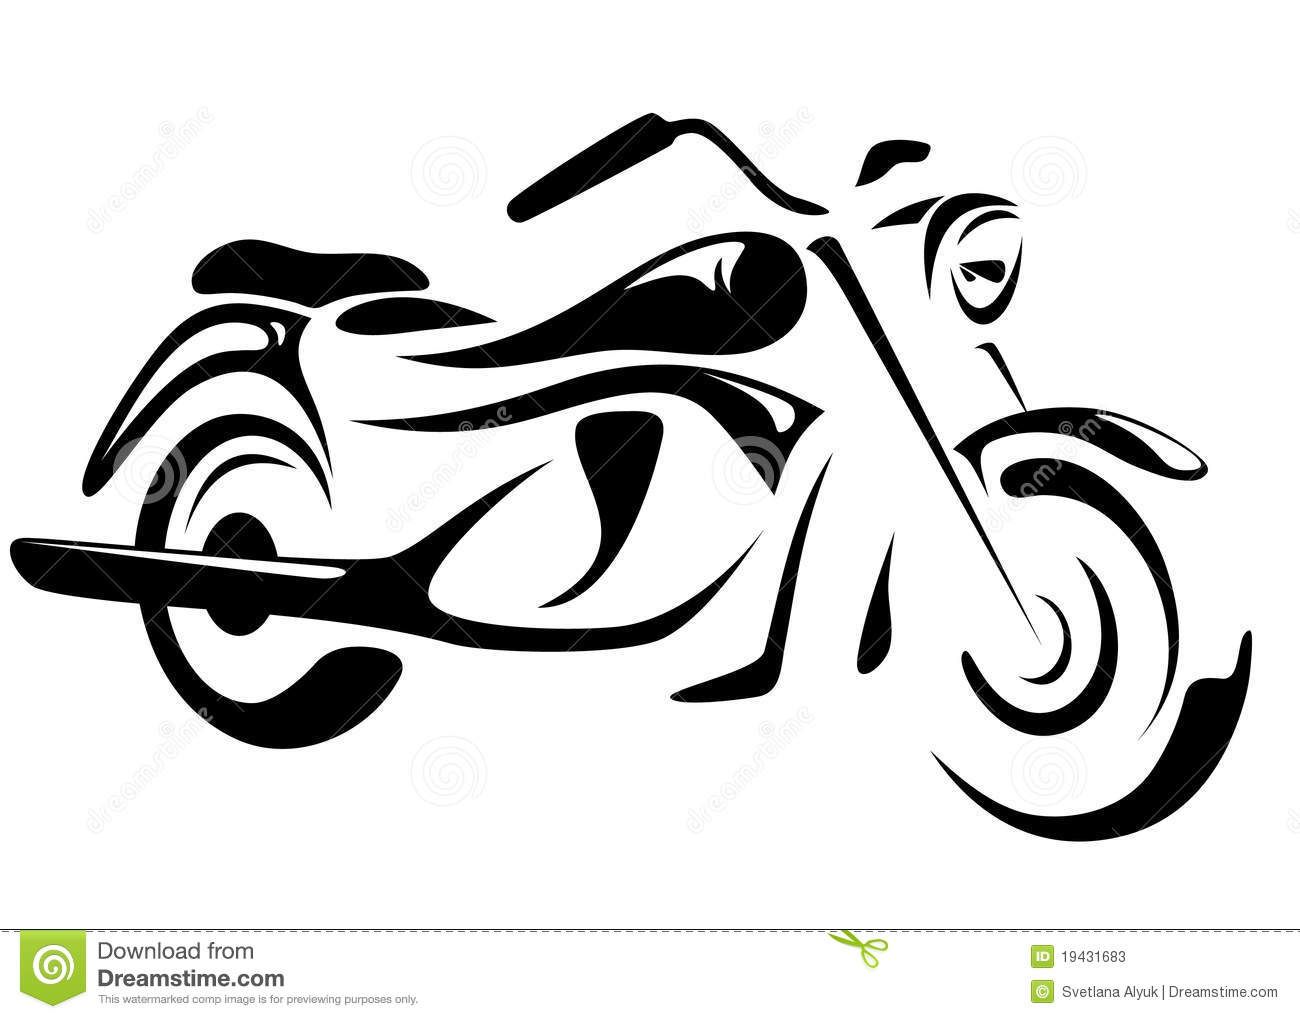 Images for motorcycle rider. Bullet clipart motorbike